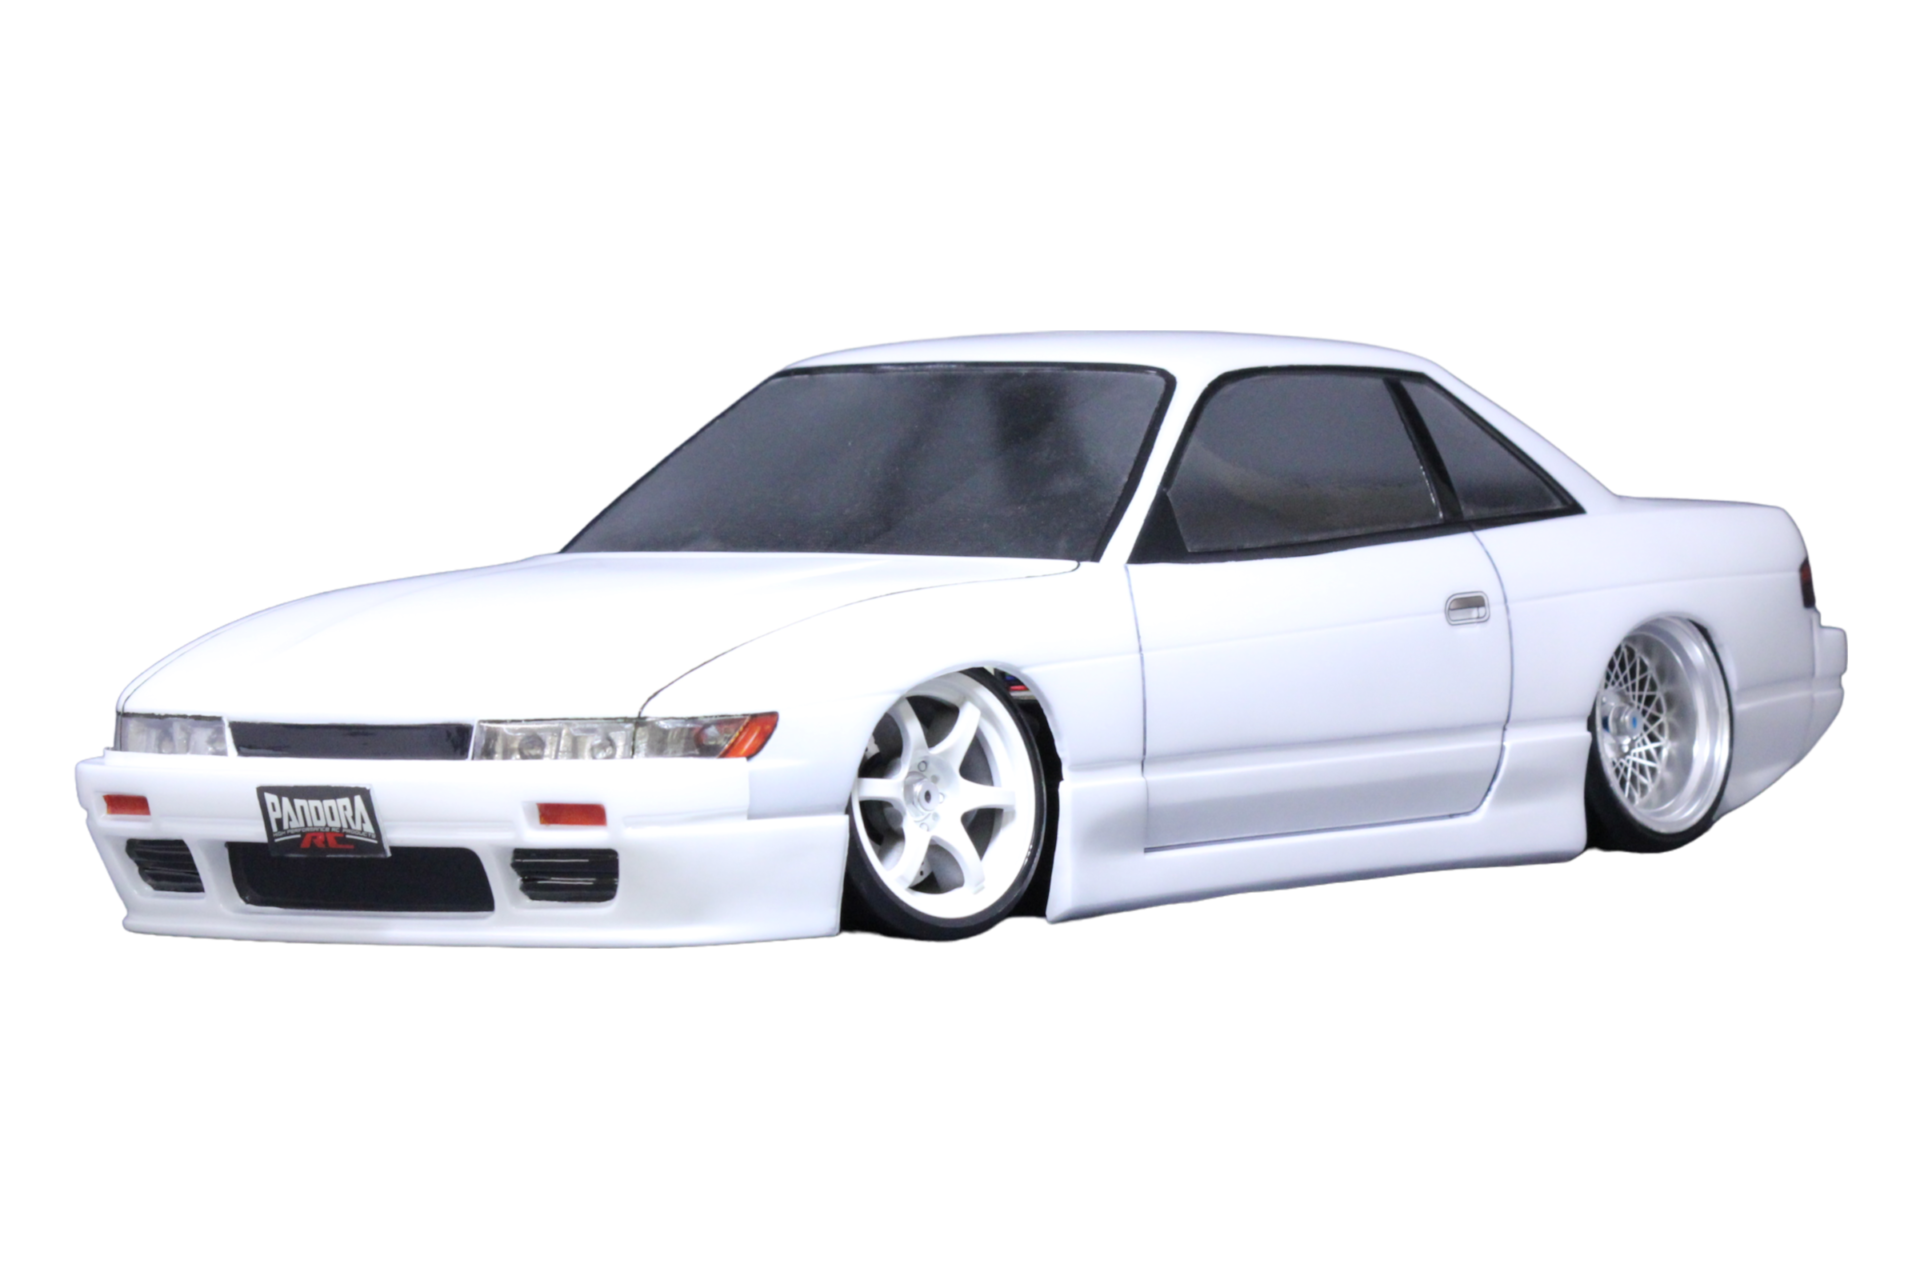 NISSAN | シルビア S13 [PAB-3123] | PANDORA RC｜OFFICIAL WEBSITE